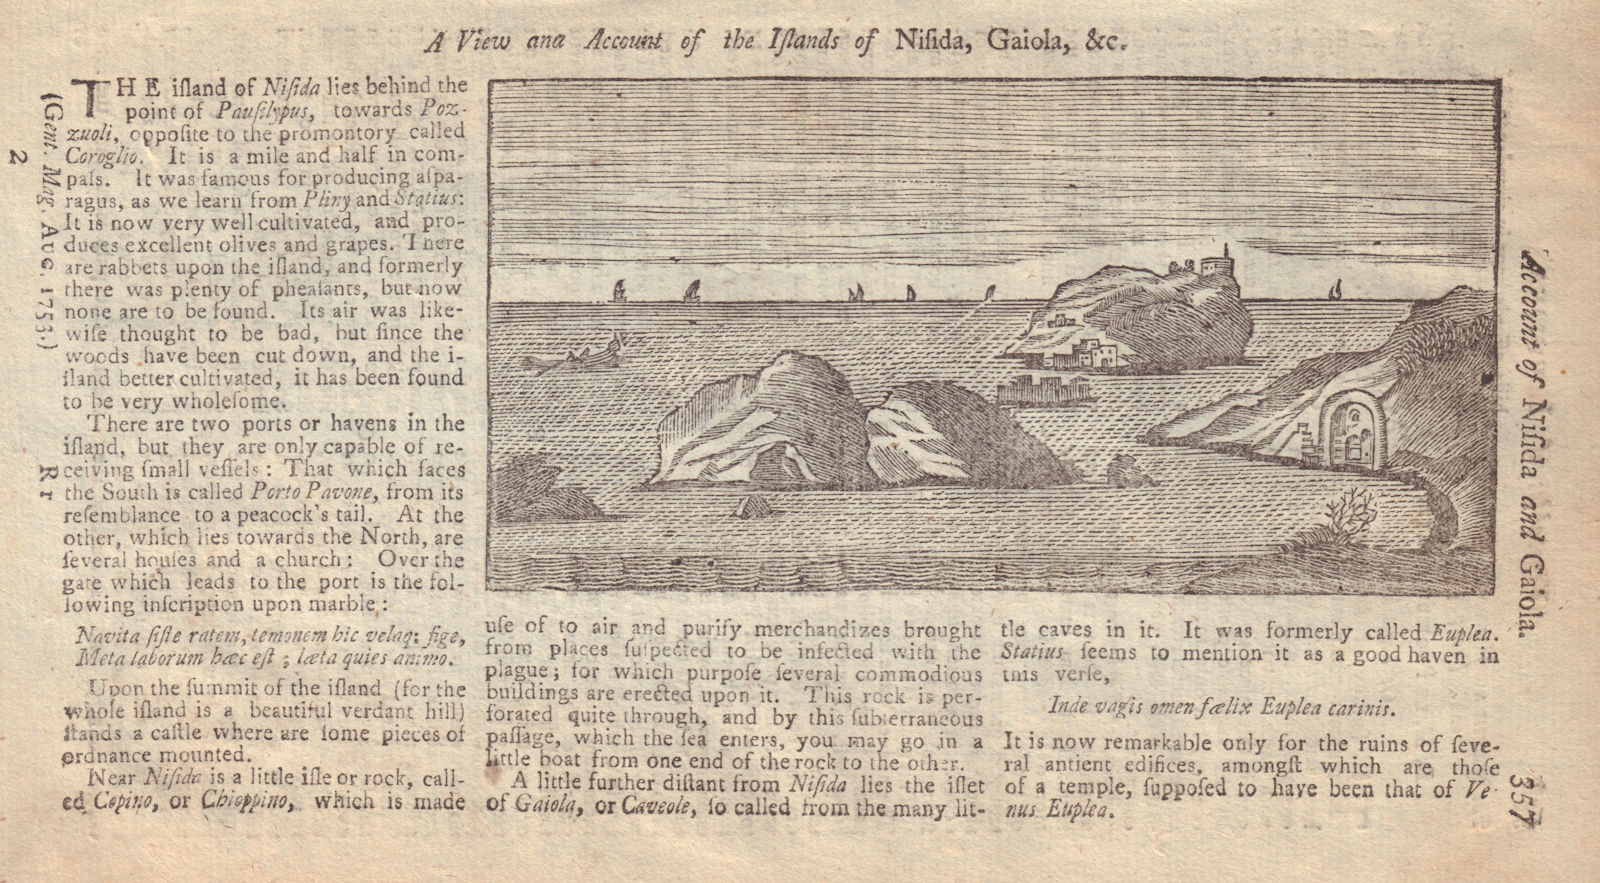 Associate Product A View and Account of the Islands of Nisida & Gaiola near Naples, Italy 1753